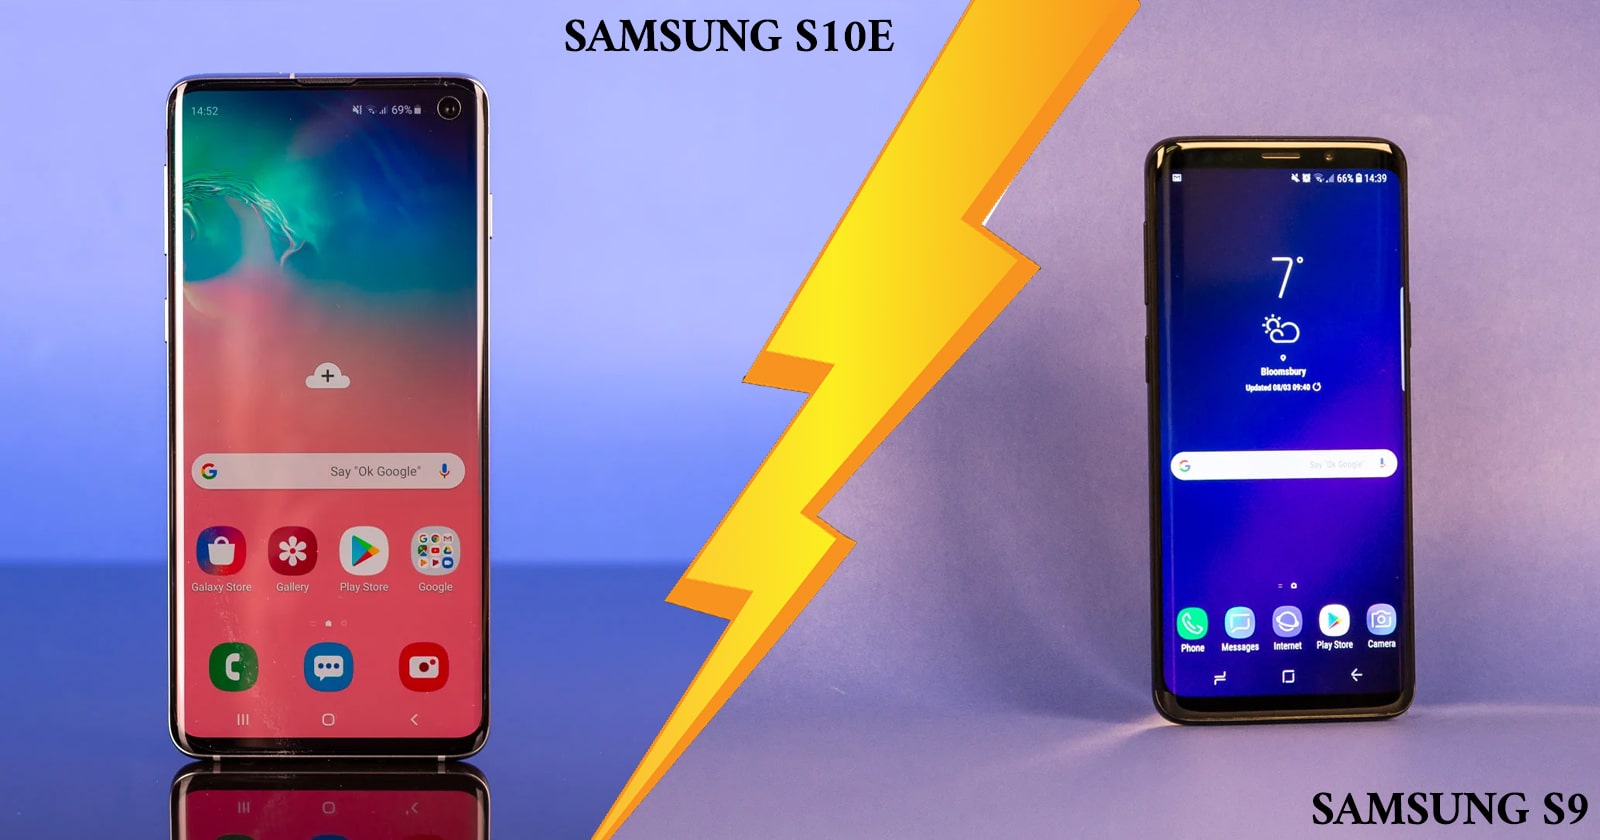 What Is the Difference Between Samsung S9 and S10e